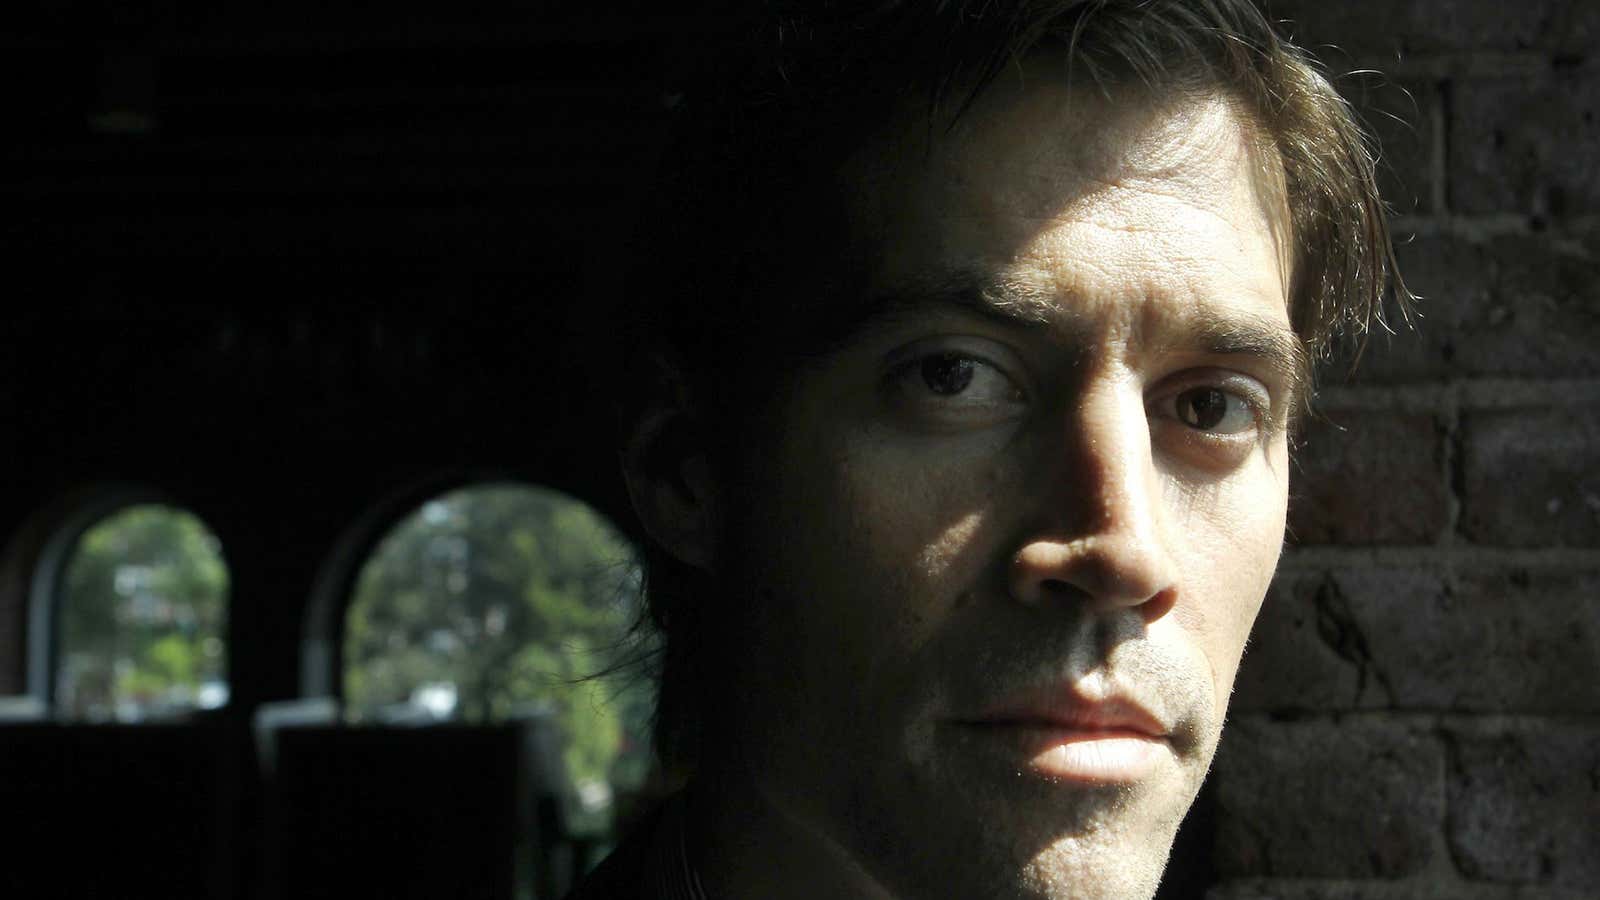 US journalist James Foley was on assignment for the Global Post in Syria when he was captured